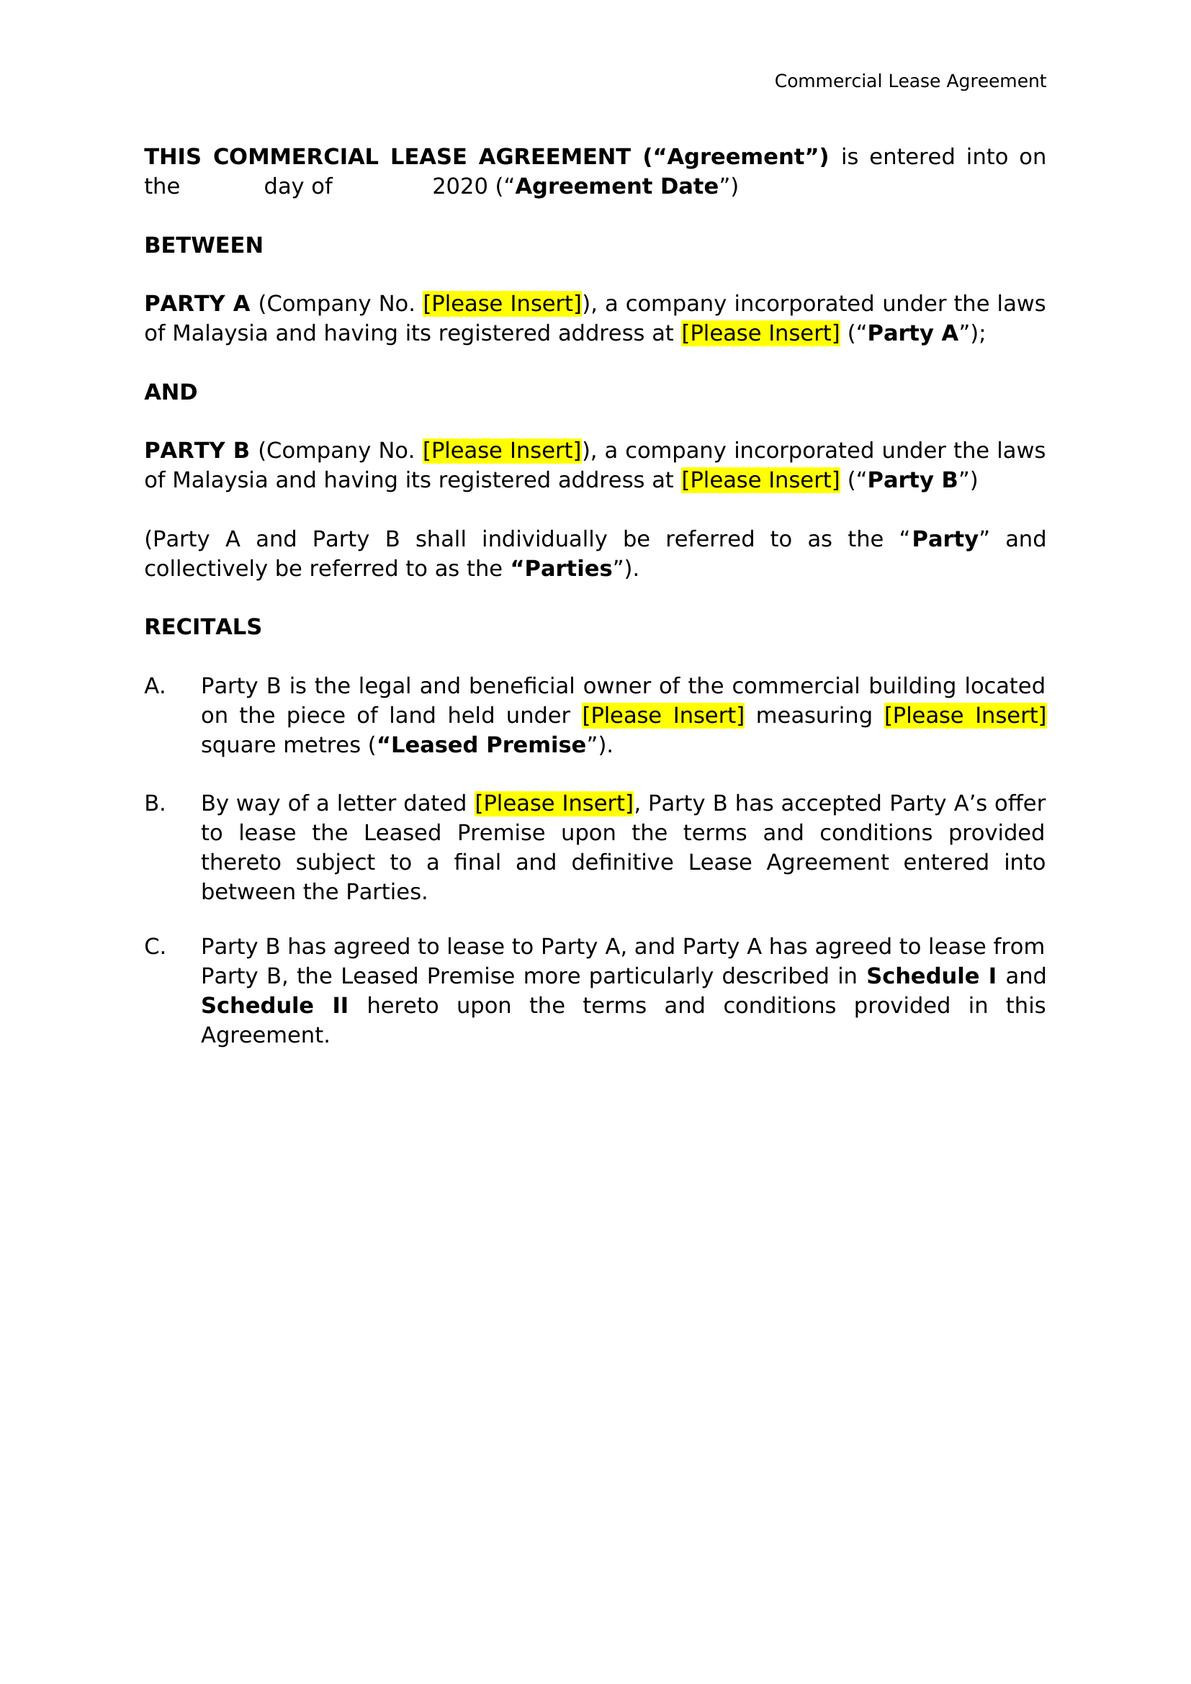 Commercial Lease Agreement for Lease of Hotel Building-1